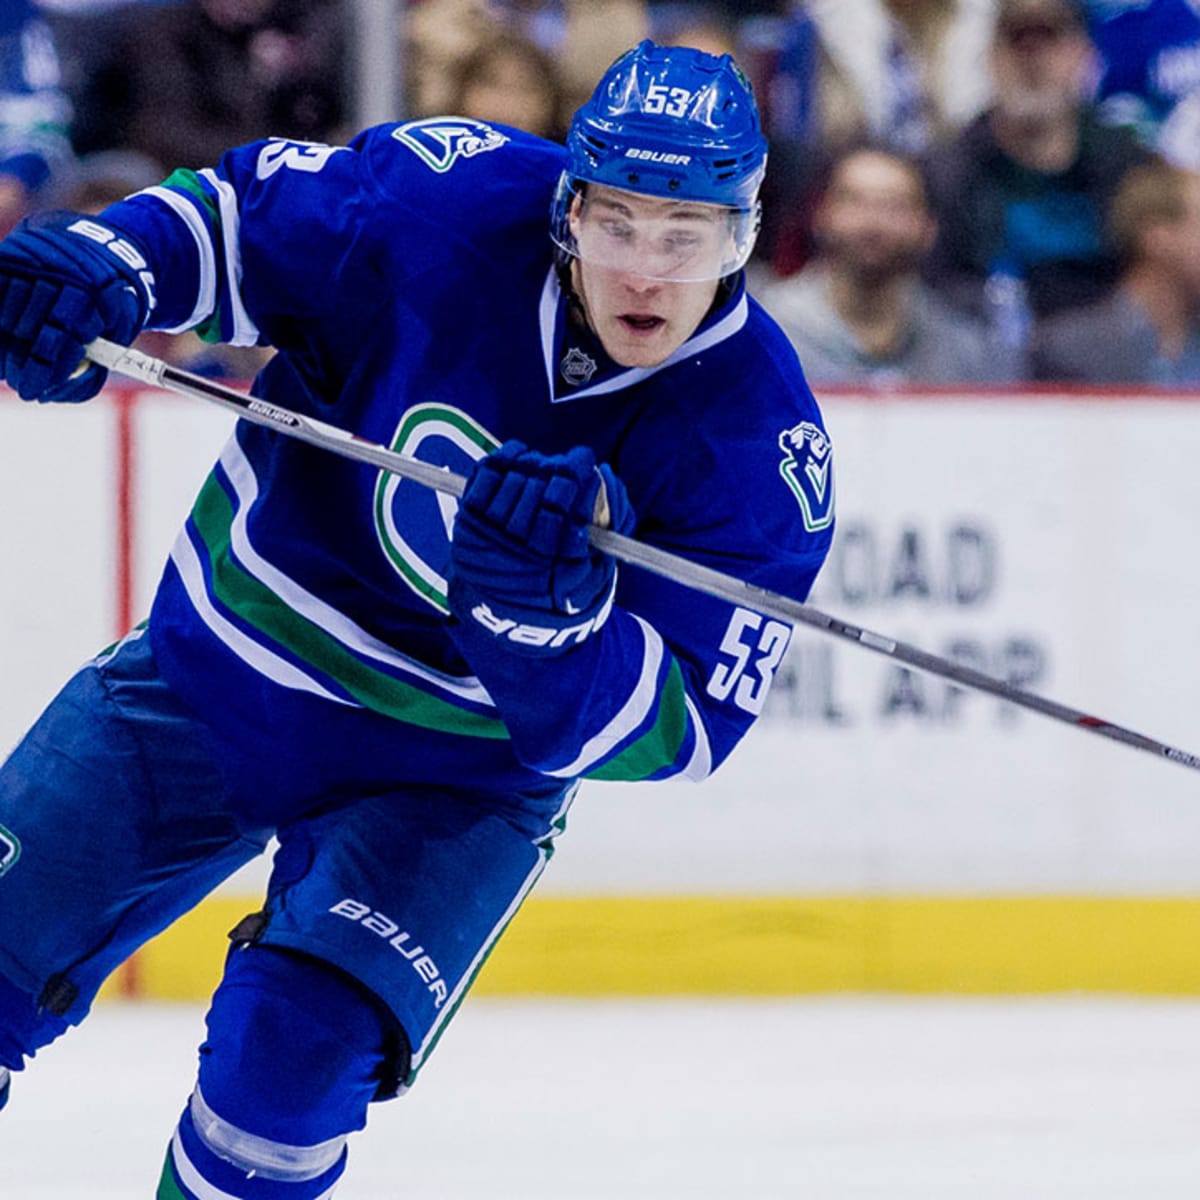 Horvat's parents unable to buy Bo's jersey at All-Star Game